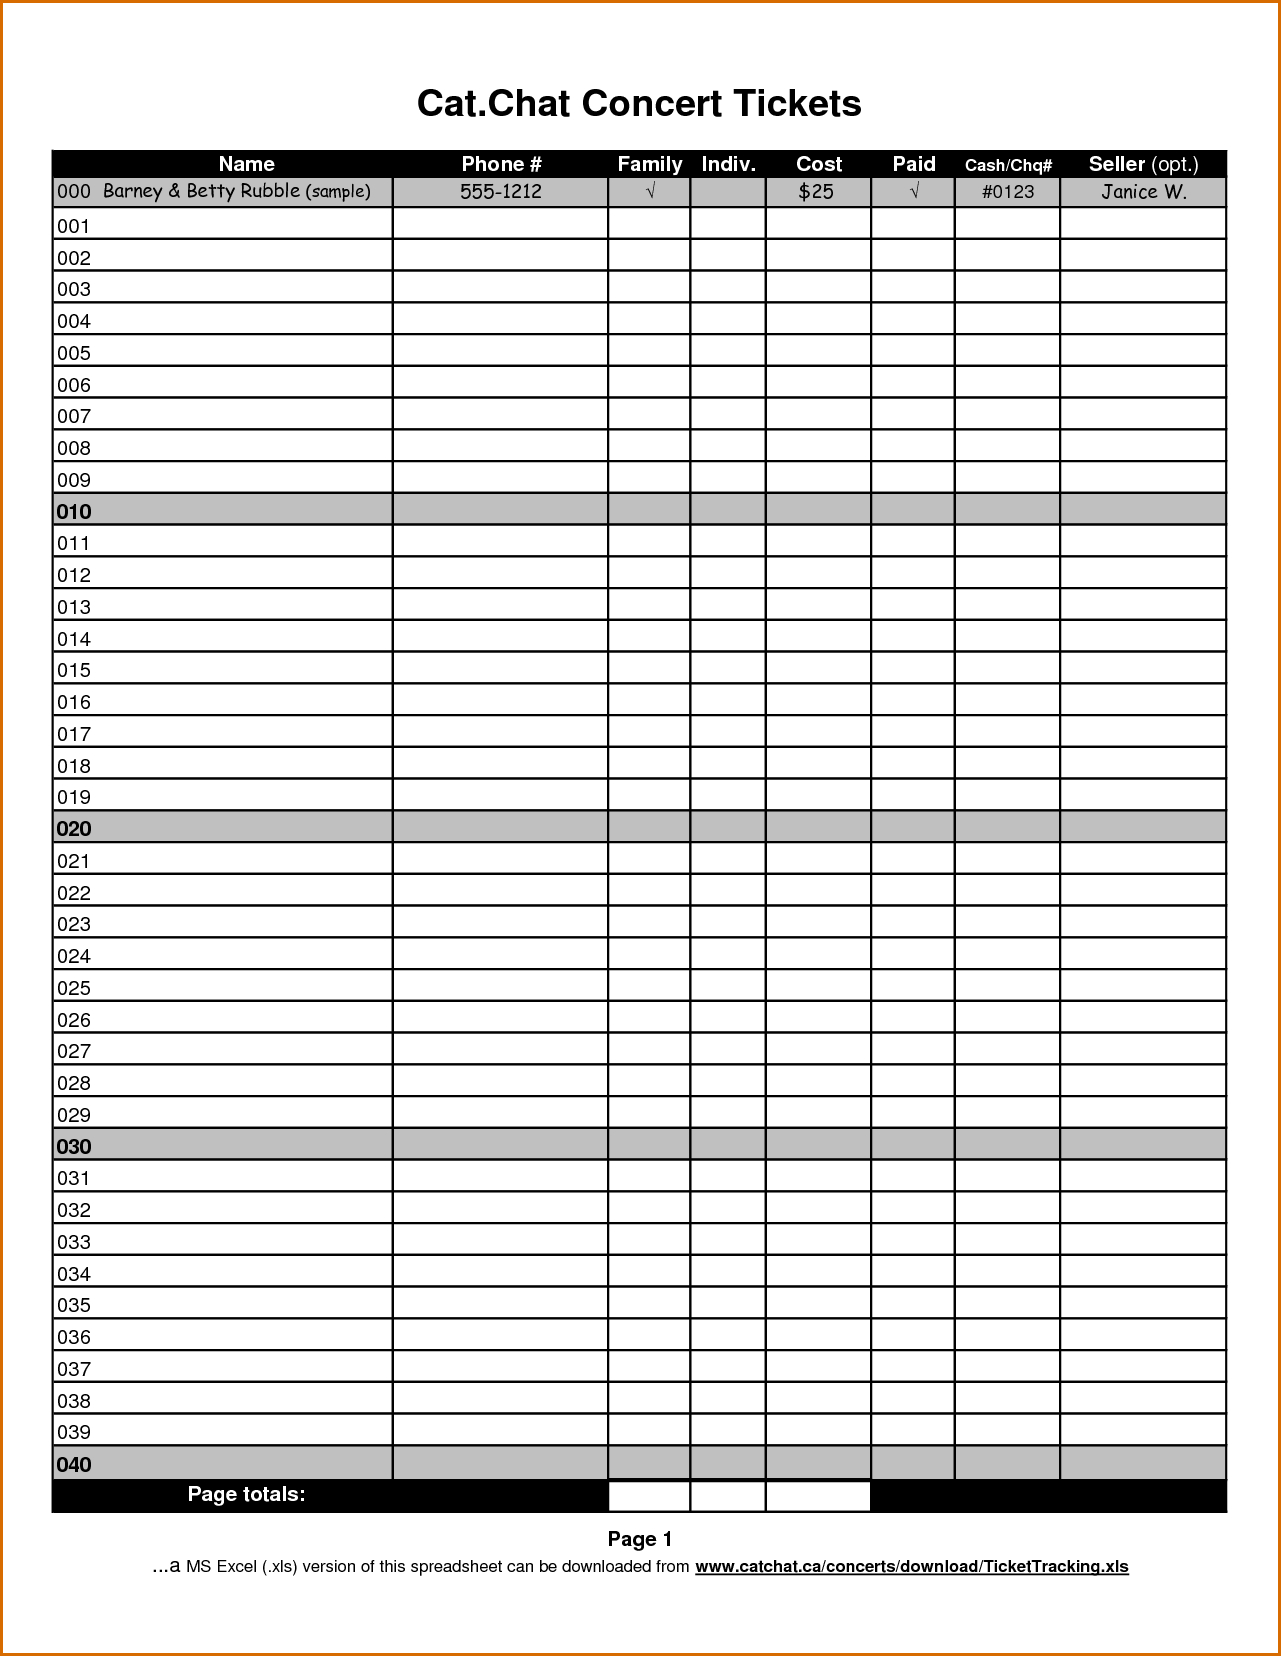 Tracking Ticket Sales Spreadsheet In Sales Tracking Sheet Template Selo L Ink Co Spreadsheet Example Of